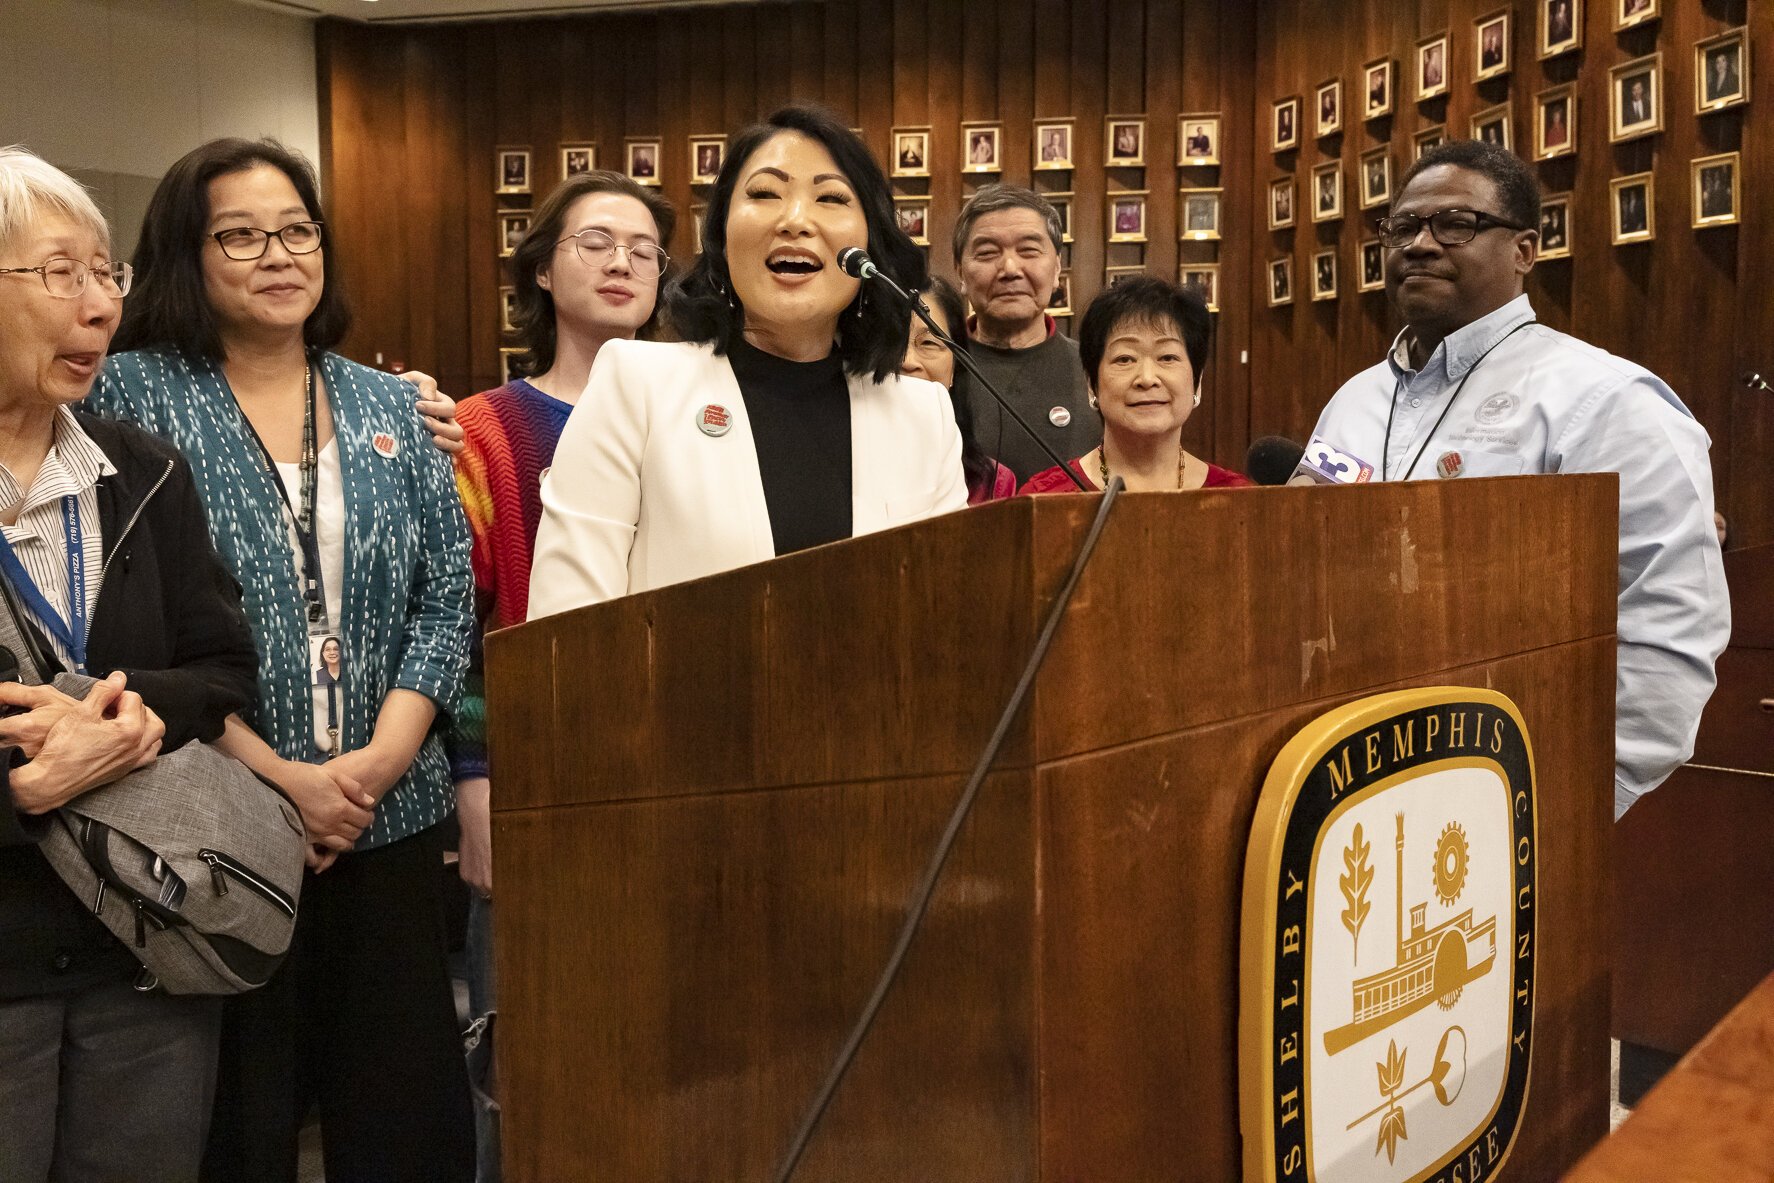 Dr. SunAh Laybourn, organizer of AAPI Heritage Month Memphis, celebrates Memphis City Council's Proclamation acknowledging AAPI Heritage Month on Tuesday, May 2, at City Hall.